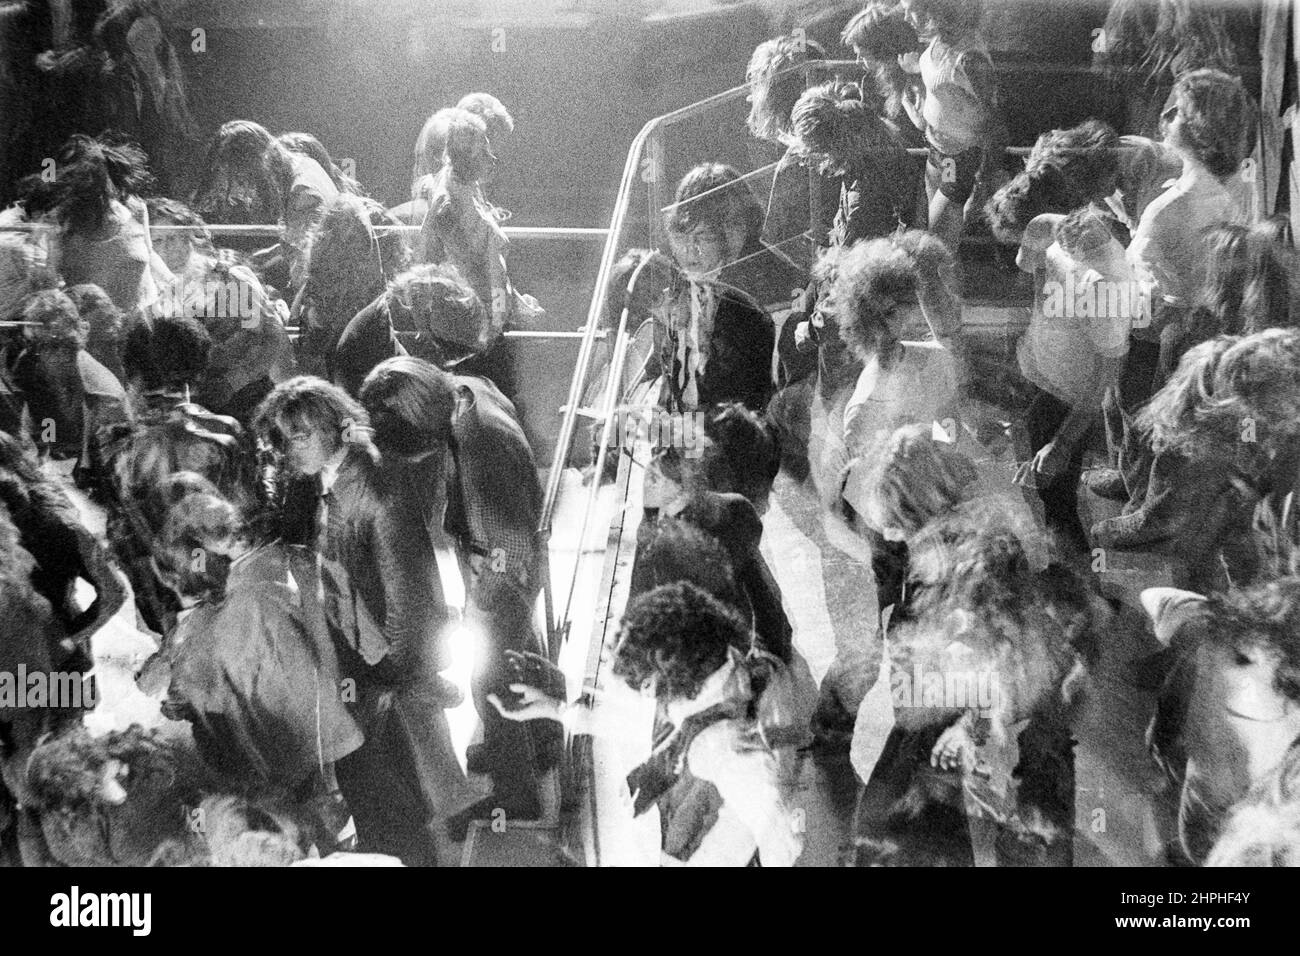 1973 photograph. Freaking out to psychodelic rock music on the dance floor in a smokey Hamburg , Germany discotheque. Stock Photo